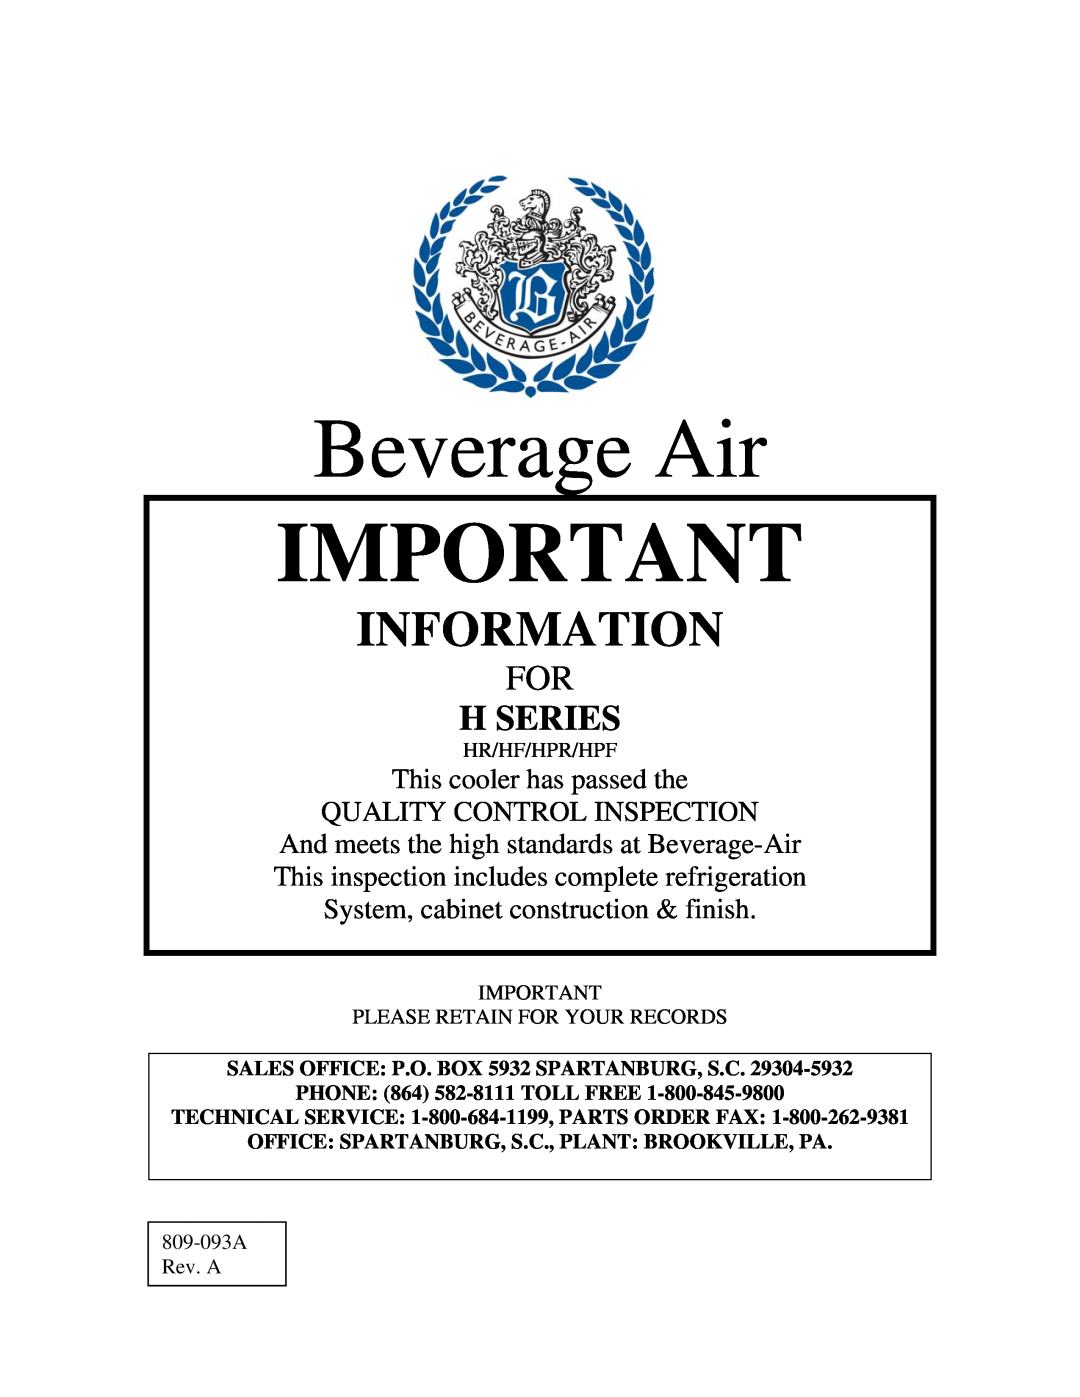 Beverage-Air Refrigerator manual Hr/Hf/Hpr/Hpf, Please Retain For Your Records, 809-093ARev. A, Beverage Air, Information 